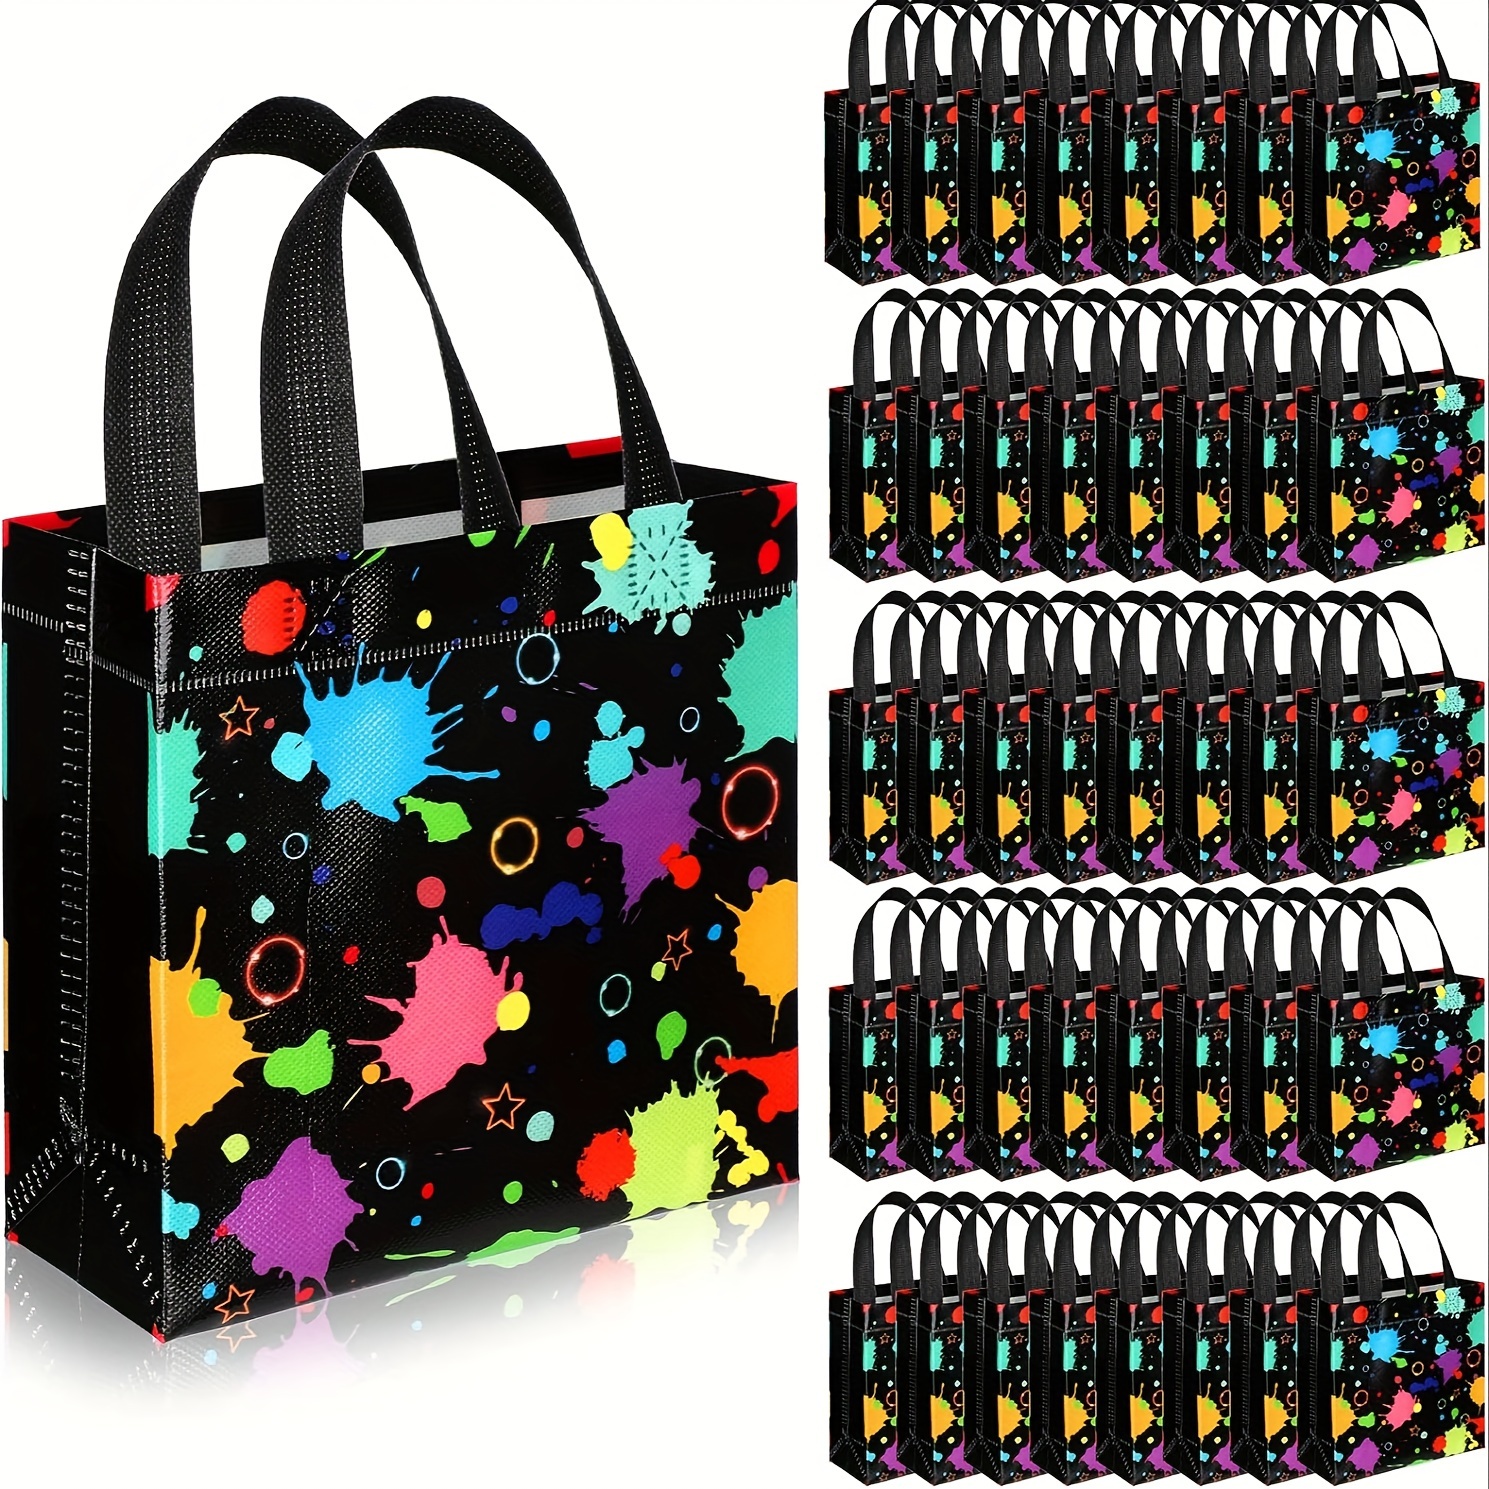 

40-pack Glow Party Tote Bags With Handles, Durable Non-woven Fabric, Bright Neon Print, Reinforced Edges, Goodie Bag Set For Celebrations And Events